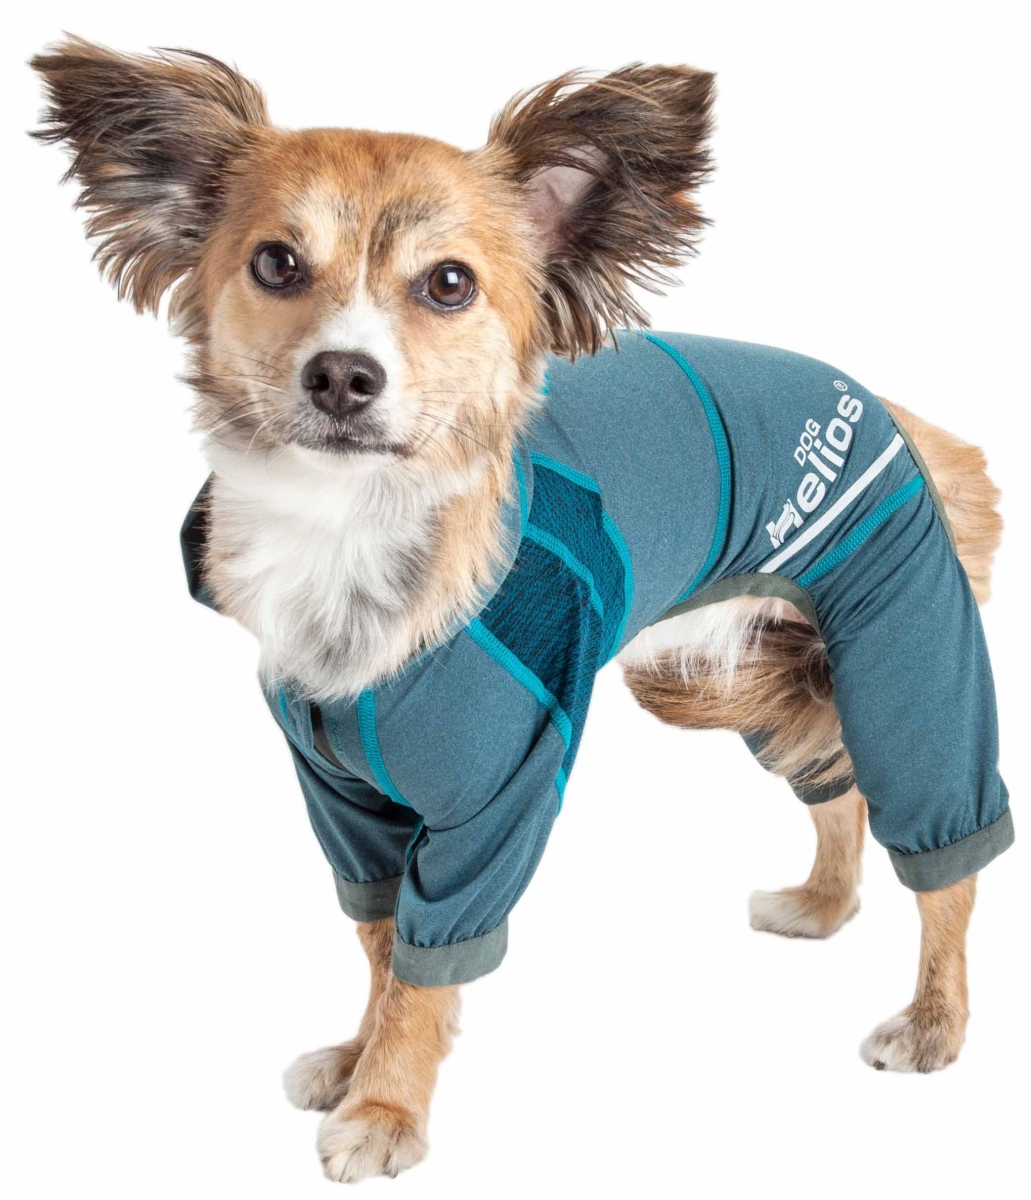 Yghl7tlsm Namastail 4-way Stretch Breathable Full Bodied Performance Yoga Dog Hoodie Tracksuit - Teal & Blue, Small